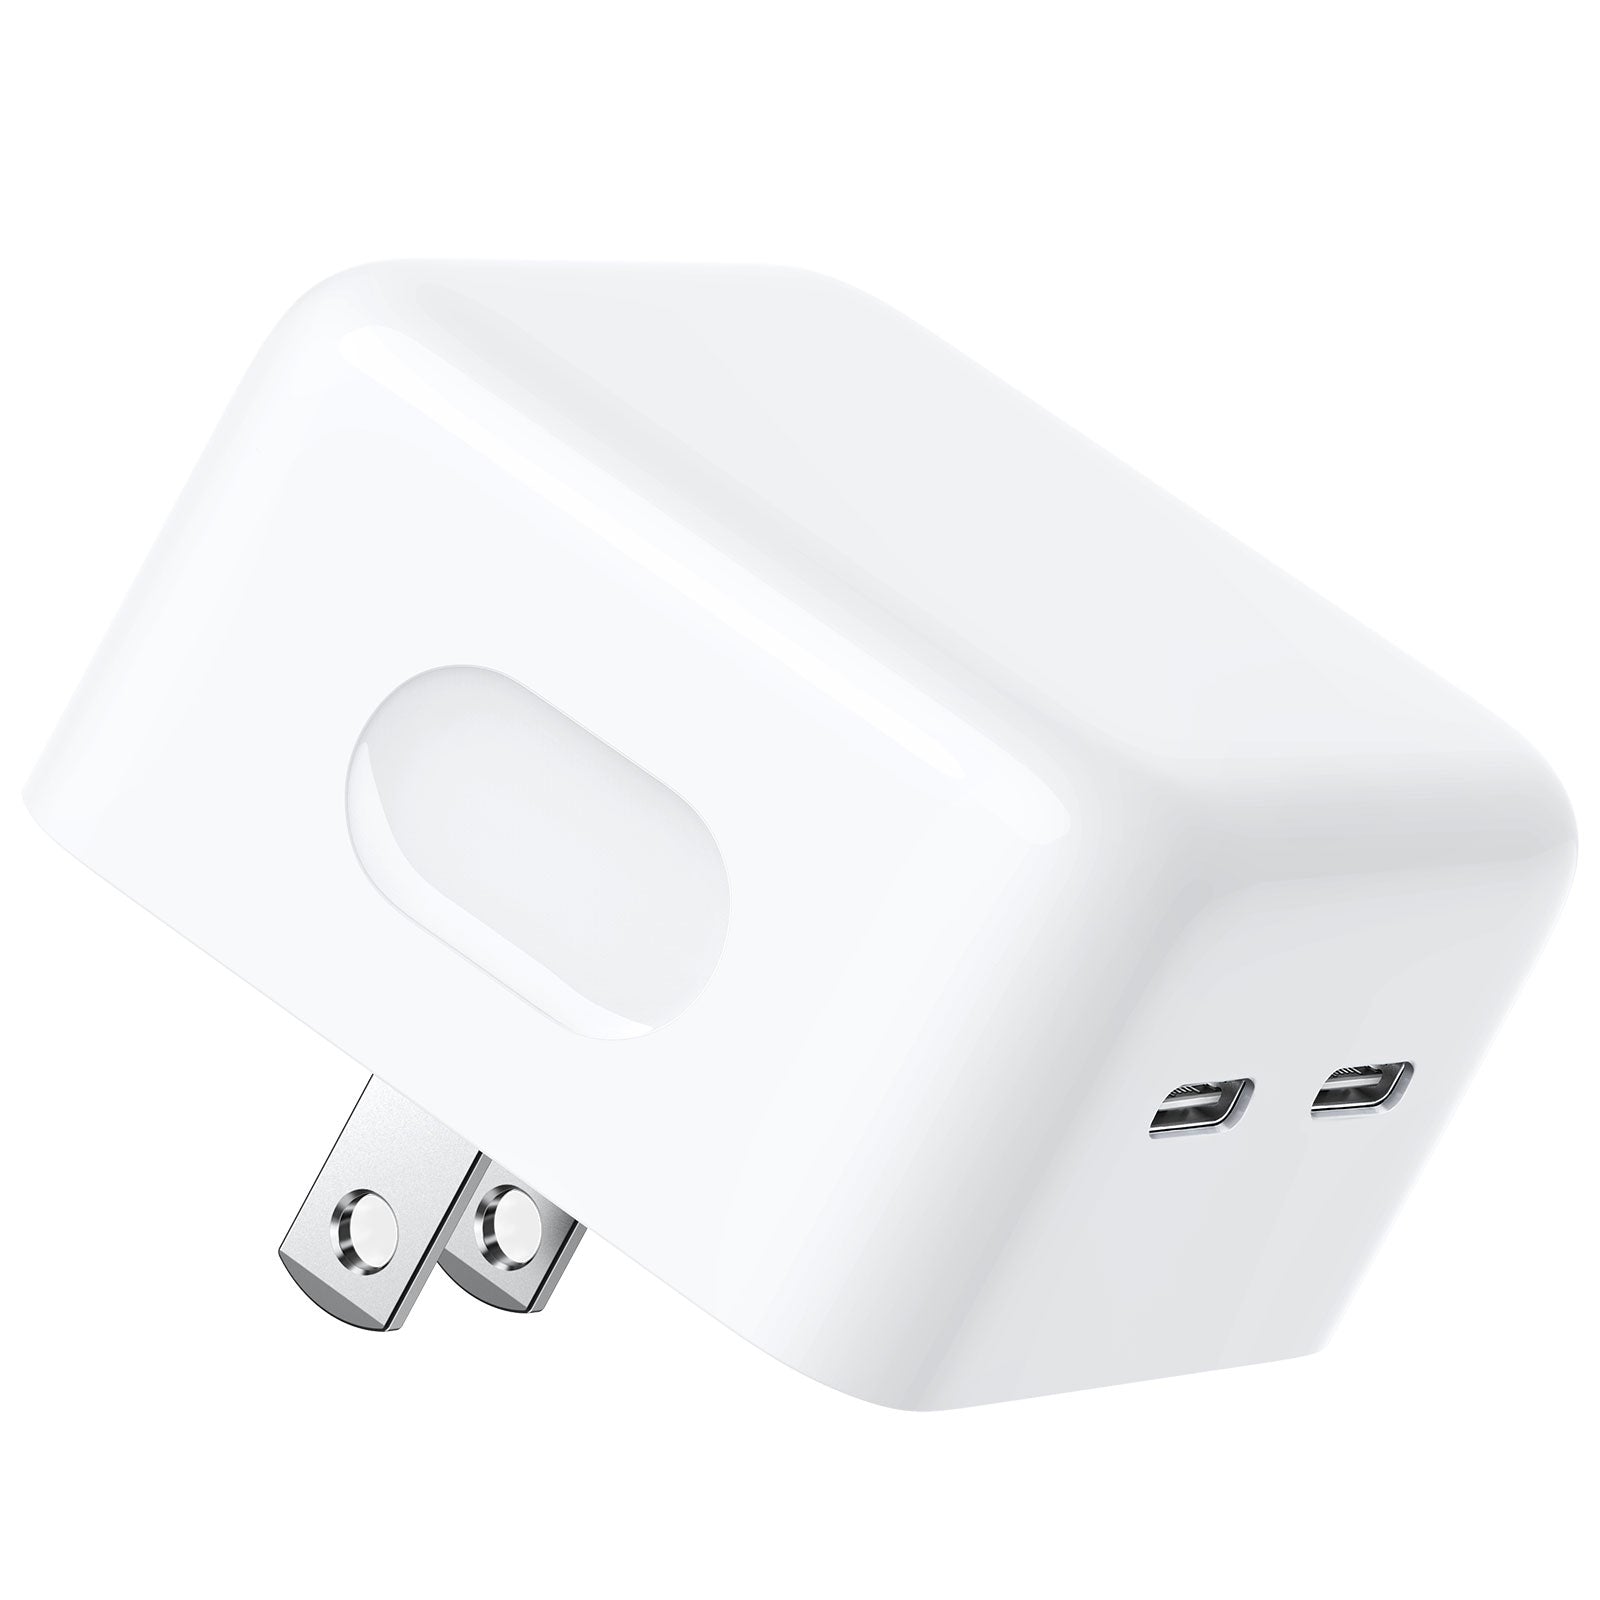 Chargeur mural double USB-C 35 W, PD 3.0 35 W pliable USB Plug iPad Charger  Cube pour iPhone 13/iPhone 13 Pro Max/iPhone 12/11, iPad et plus